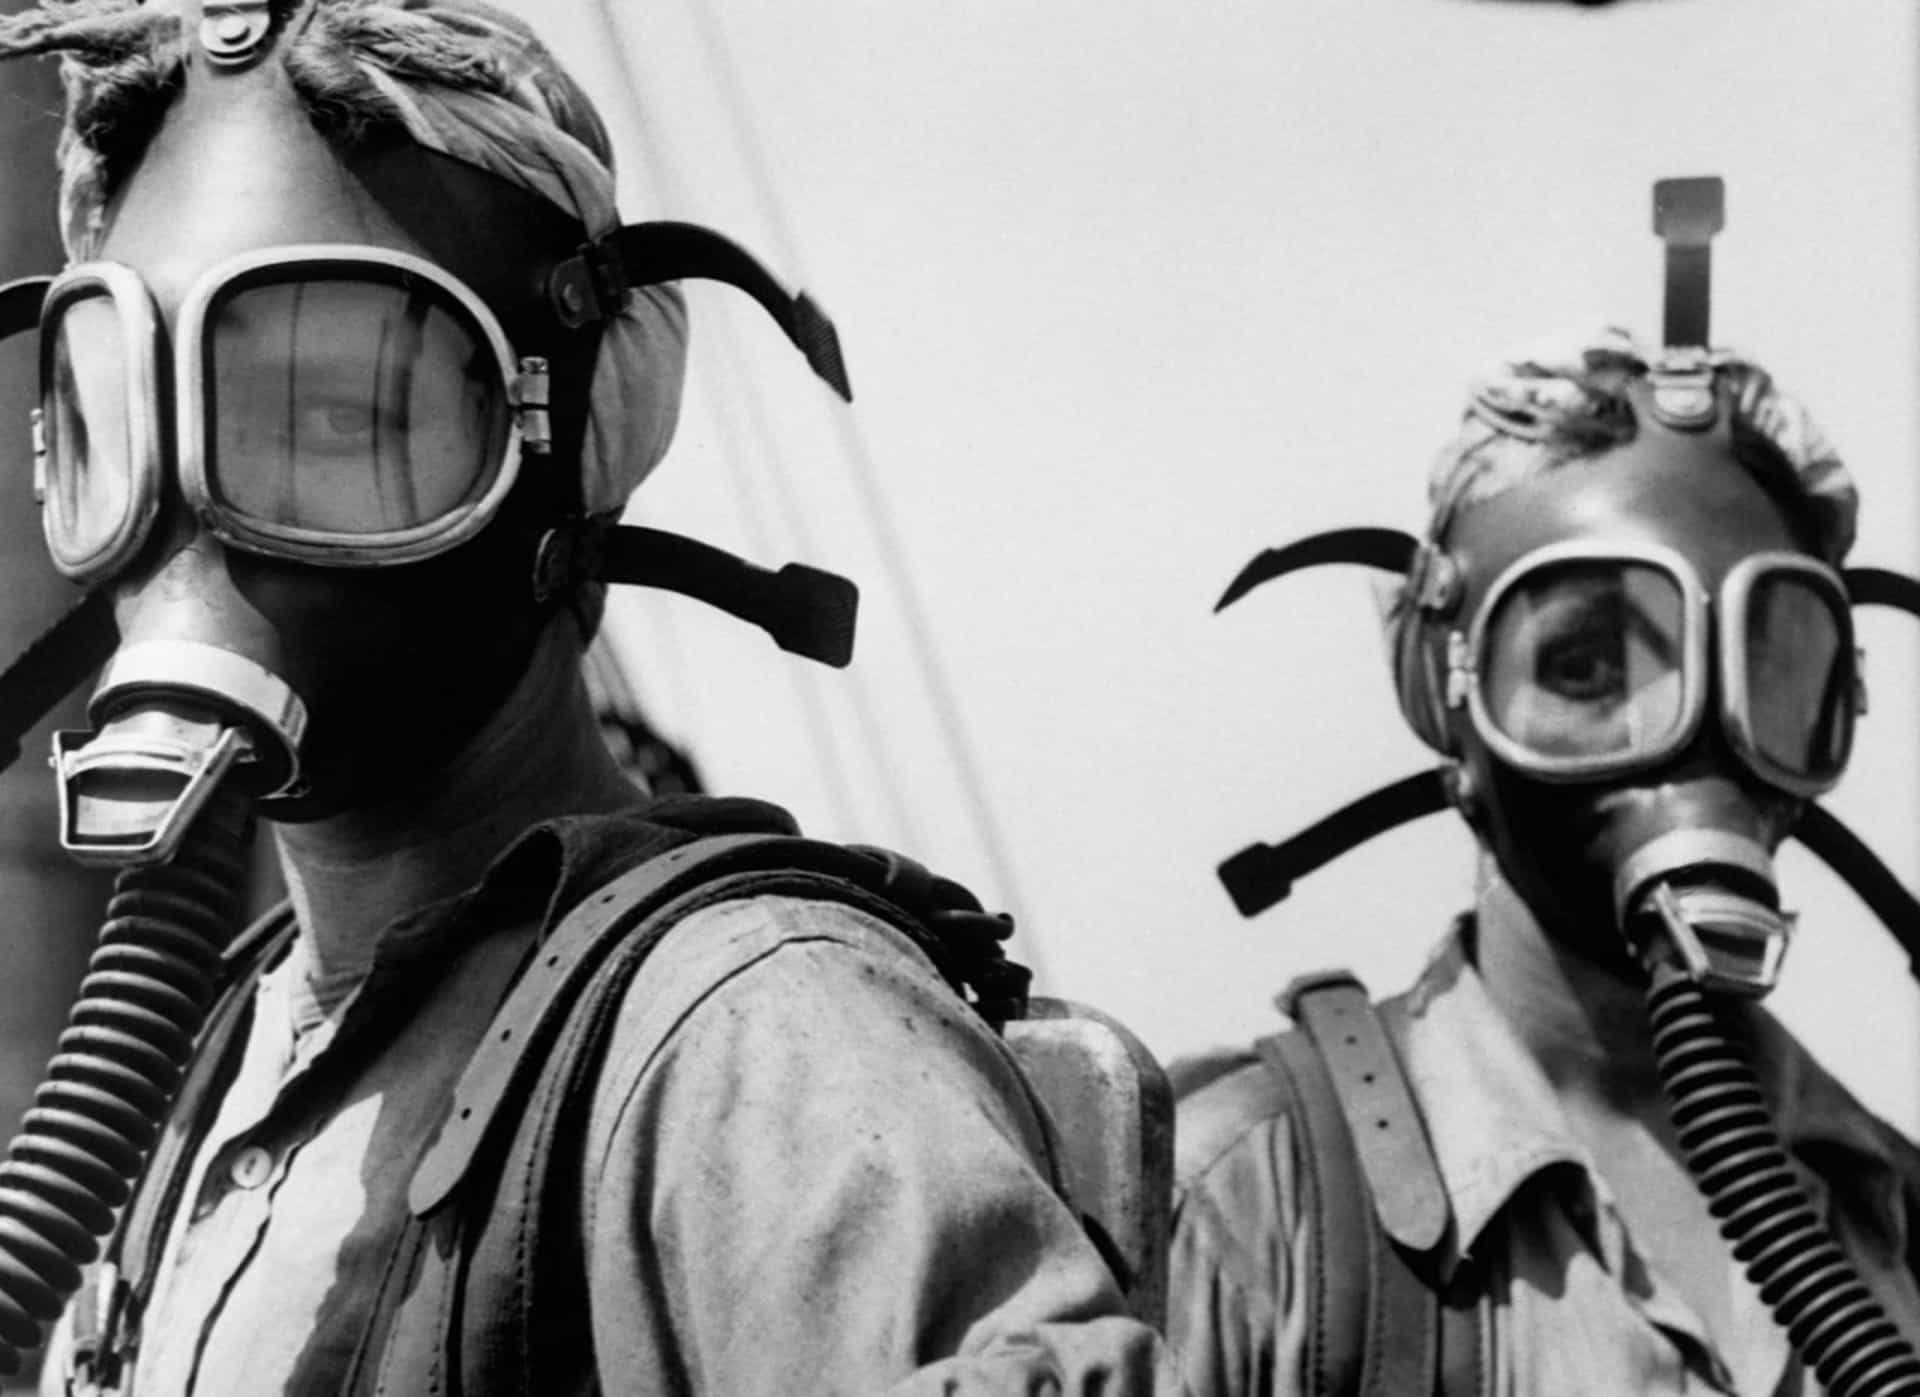 <p>Rarely did women employed in industry during the war mind getting their hands dirty. One of the grubbiest—and most dangerous—gigs was cleaning the tops of blast furnaces. This required the wearing of heavy overalls and gasmasks, as illustrated by these two women at a US Steel plant in Gary, Indiana.</p><p><a href="https://www.msn.com/en-us/community/channel/vid-7xx8mnucu55yw63we9va2gwr7uihbxwc68fxqp25x6tg4ftibpra?cvid=94631541bc0f4f89bfd59158d696ad7e">Follow us and access great exclusive content everyday</a></p>